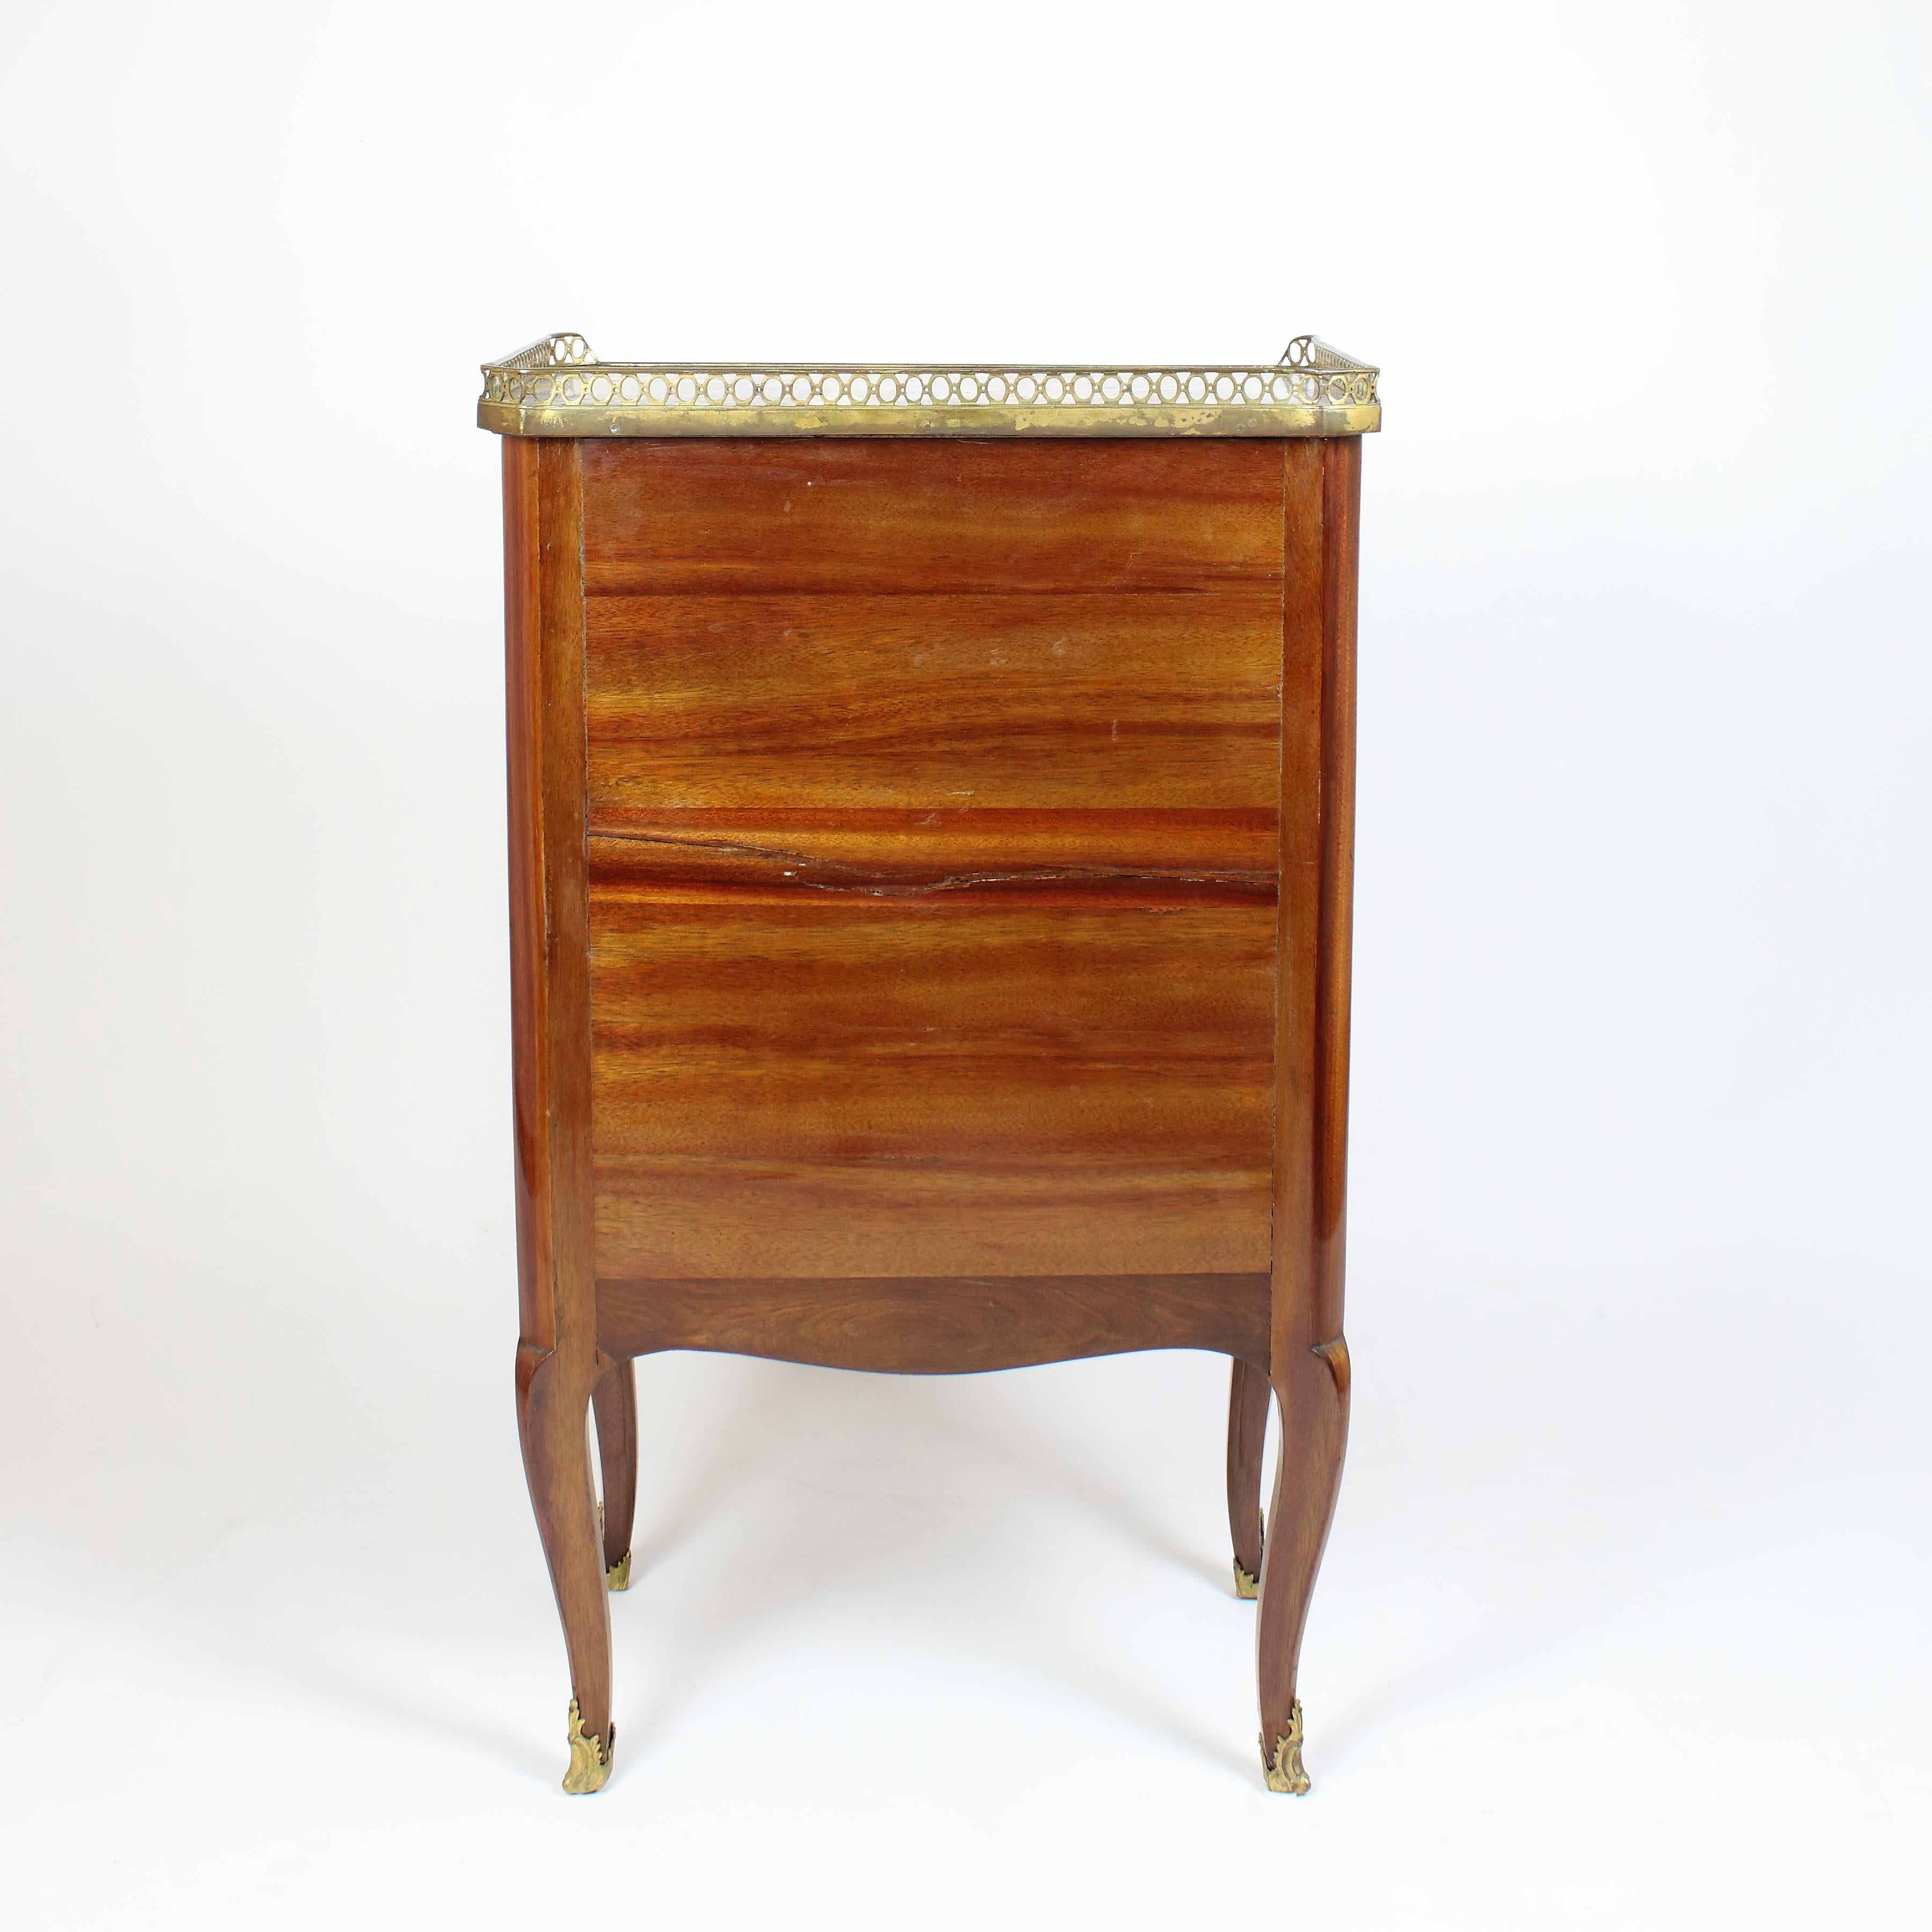 Bronze 18th Century French Transition Louis XVI Small Writing Cabinet Meuble Ecritoire For Sale